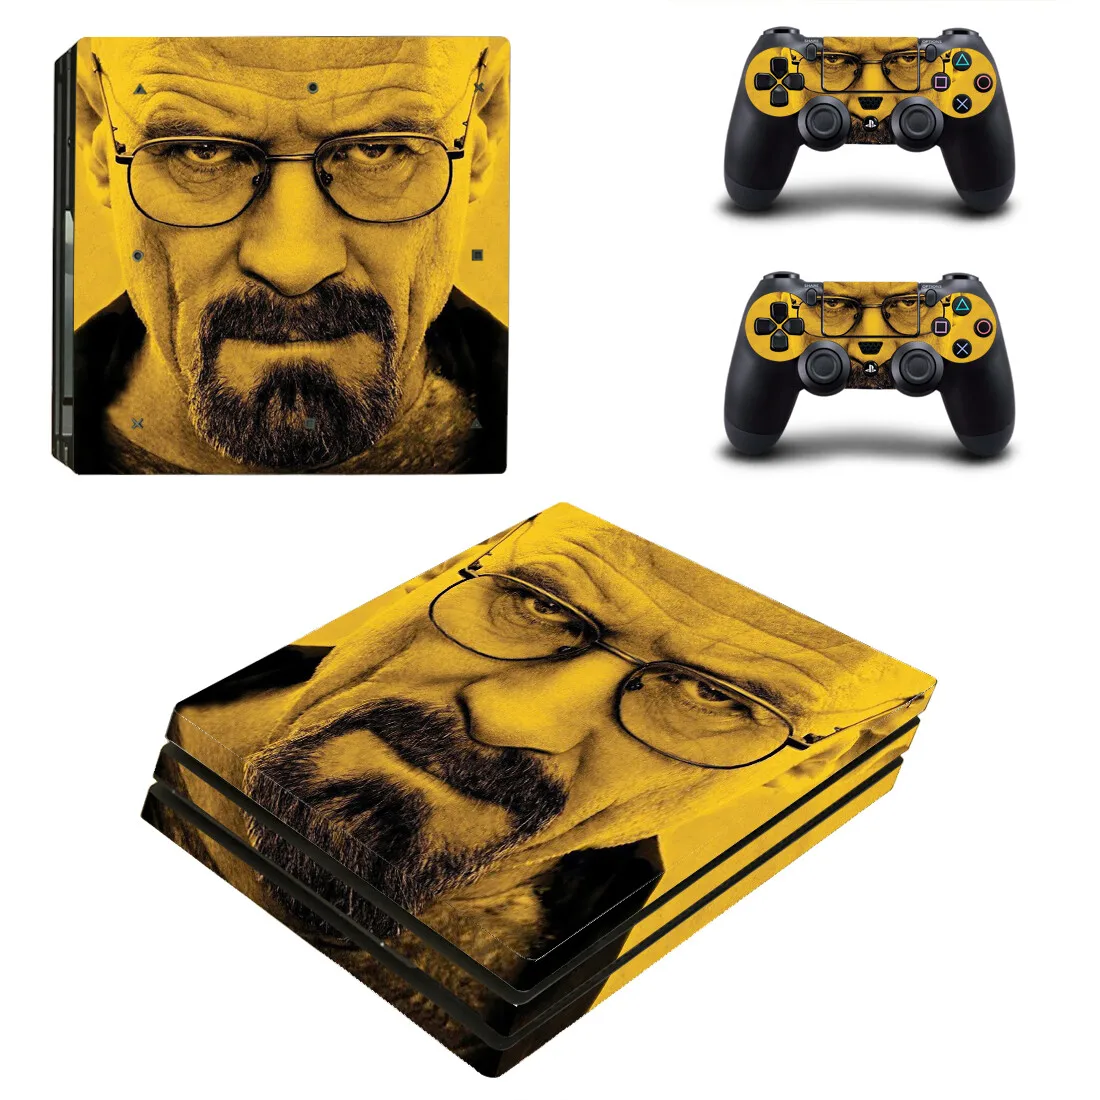 Sightseeing margen Løve Breaking Bad PS4 Pro Skin Sticker Decals Cover For PlayStation 4 PS4 Pro  Console & Controller Skins Vinyl _ - AliExpress Mobile